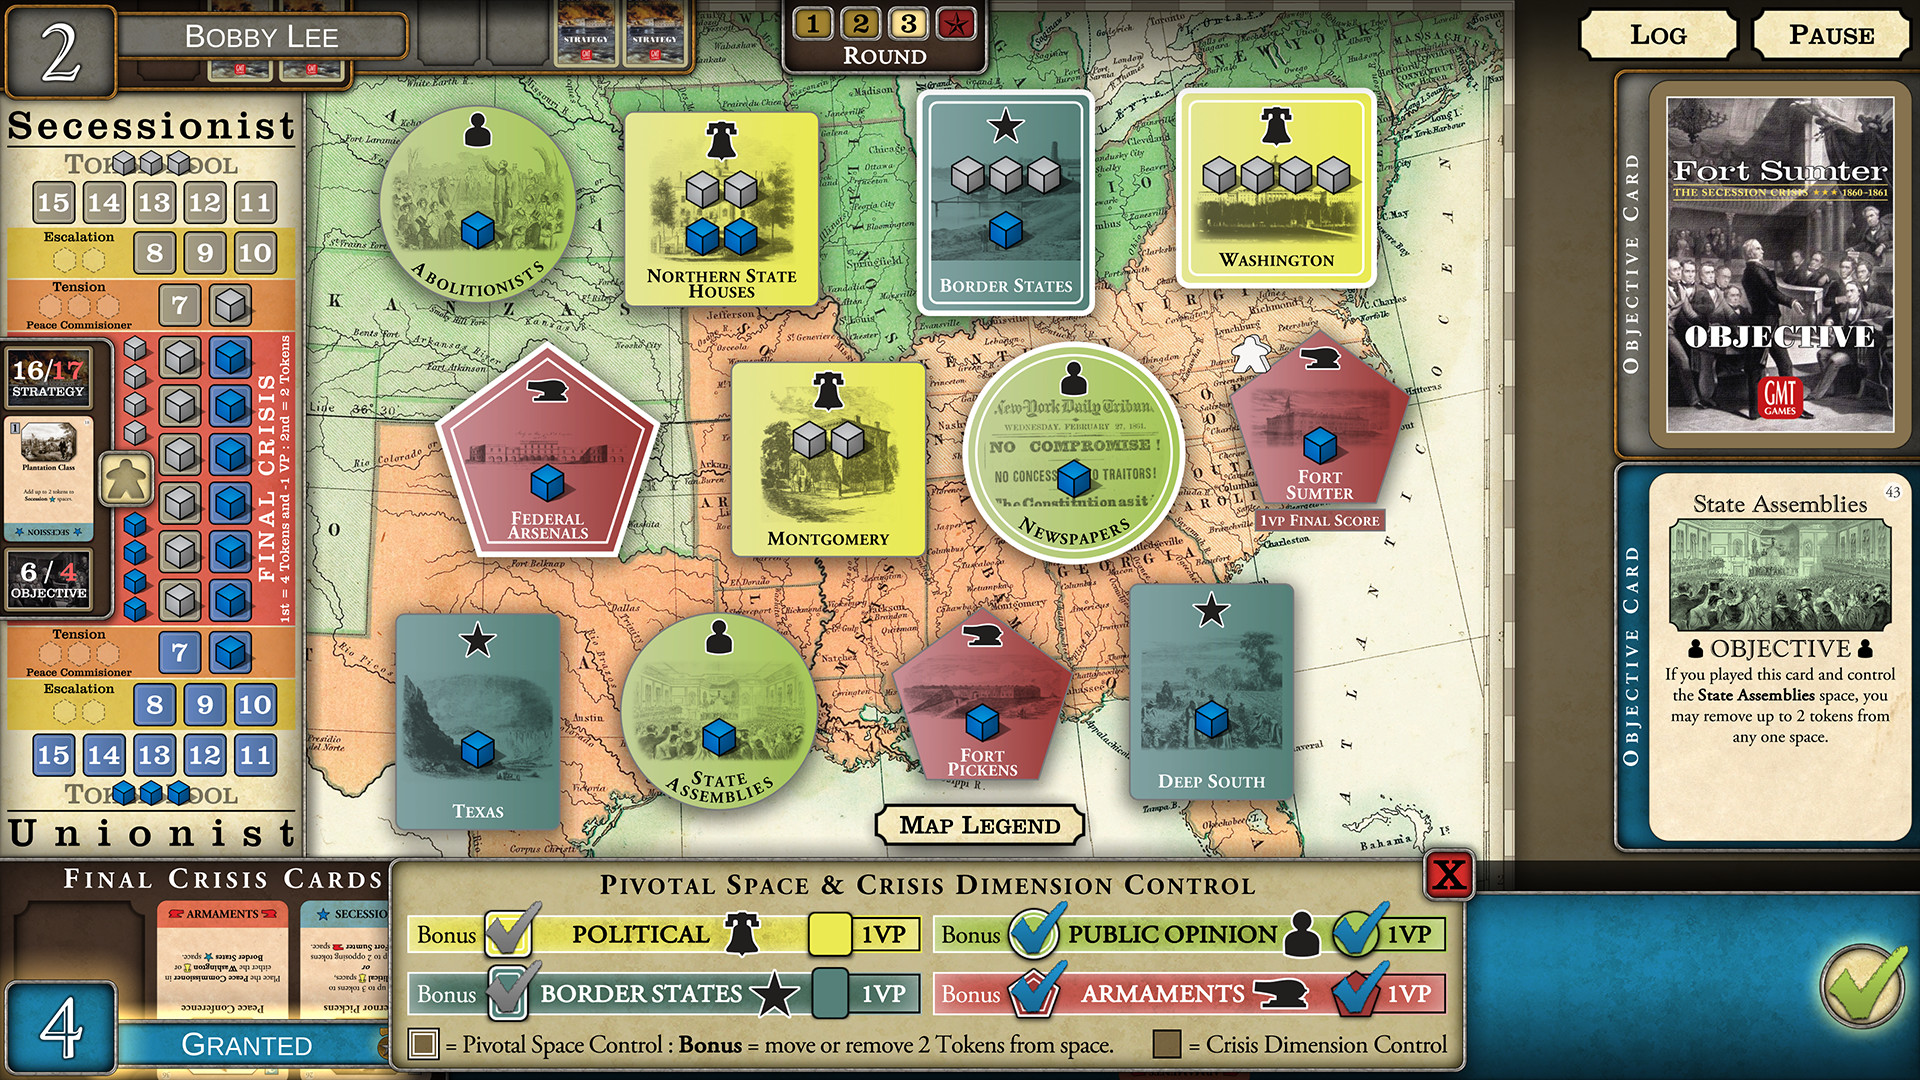 A Fort Sumter game board